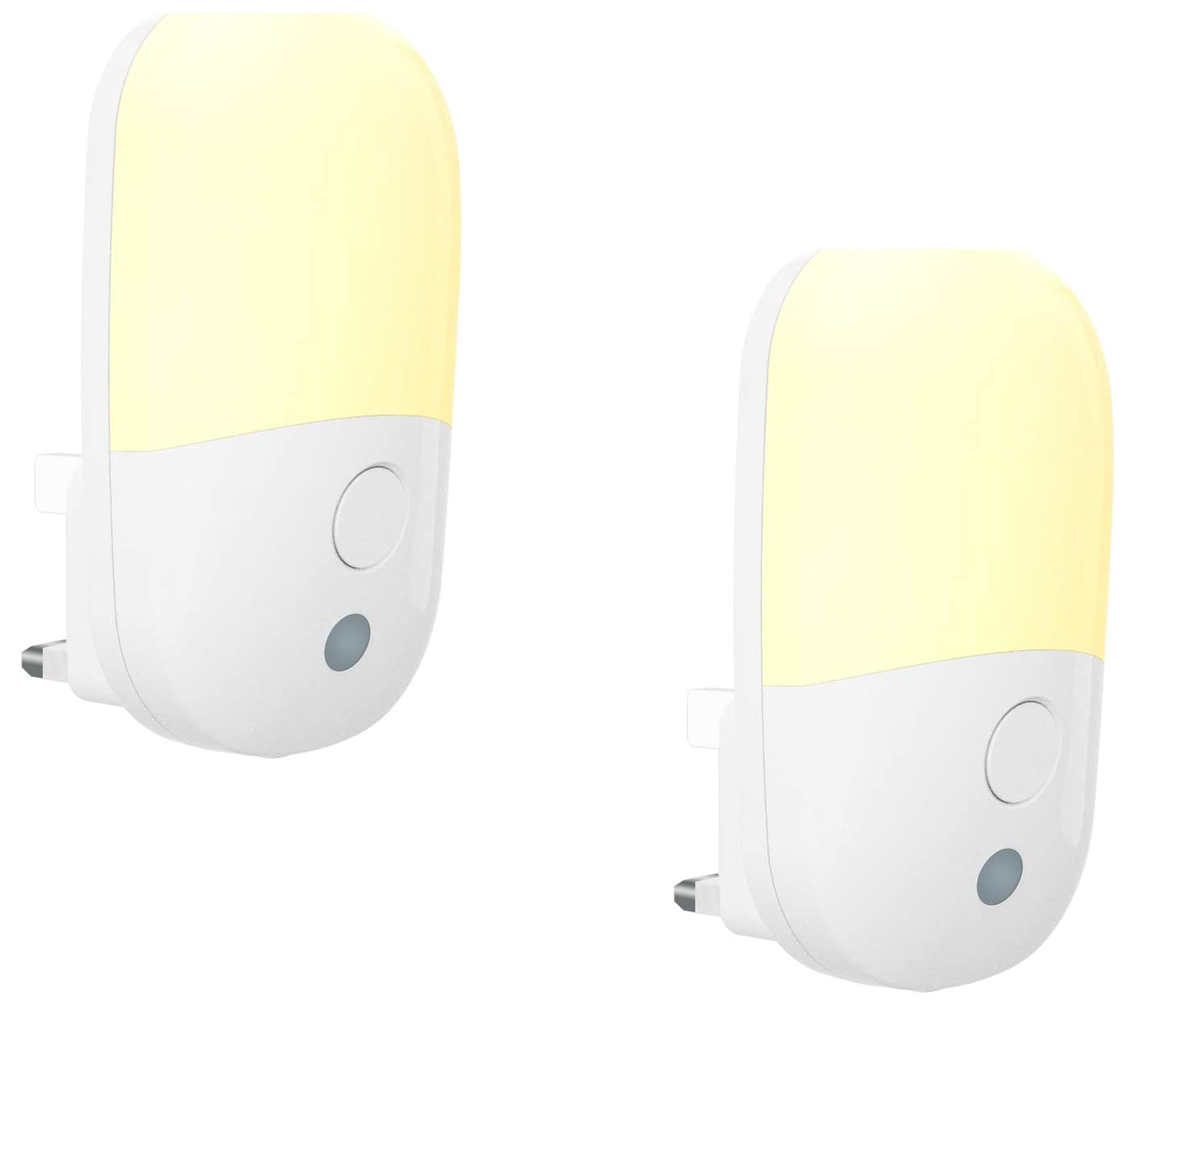 LED Night Light Plug in Walls with Dusk to Dawn Photocell Sensor - Pack Of 2